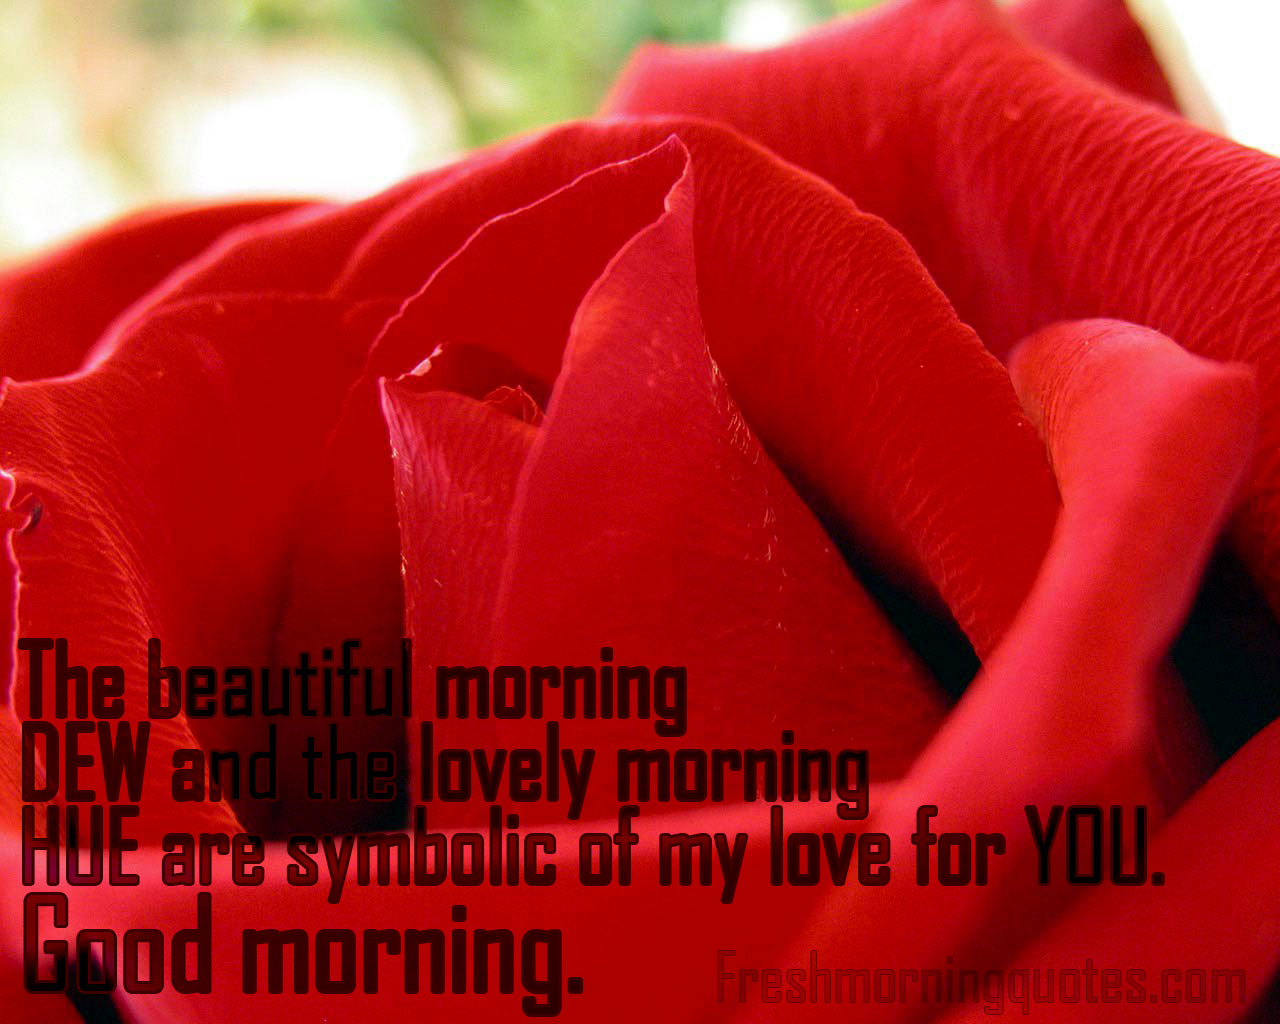 The beautiful morning DEW and the lovely morning-Good morning Quotes for Her